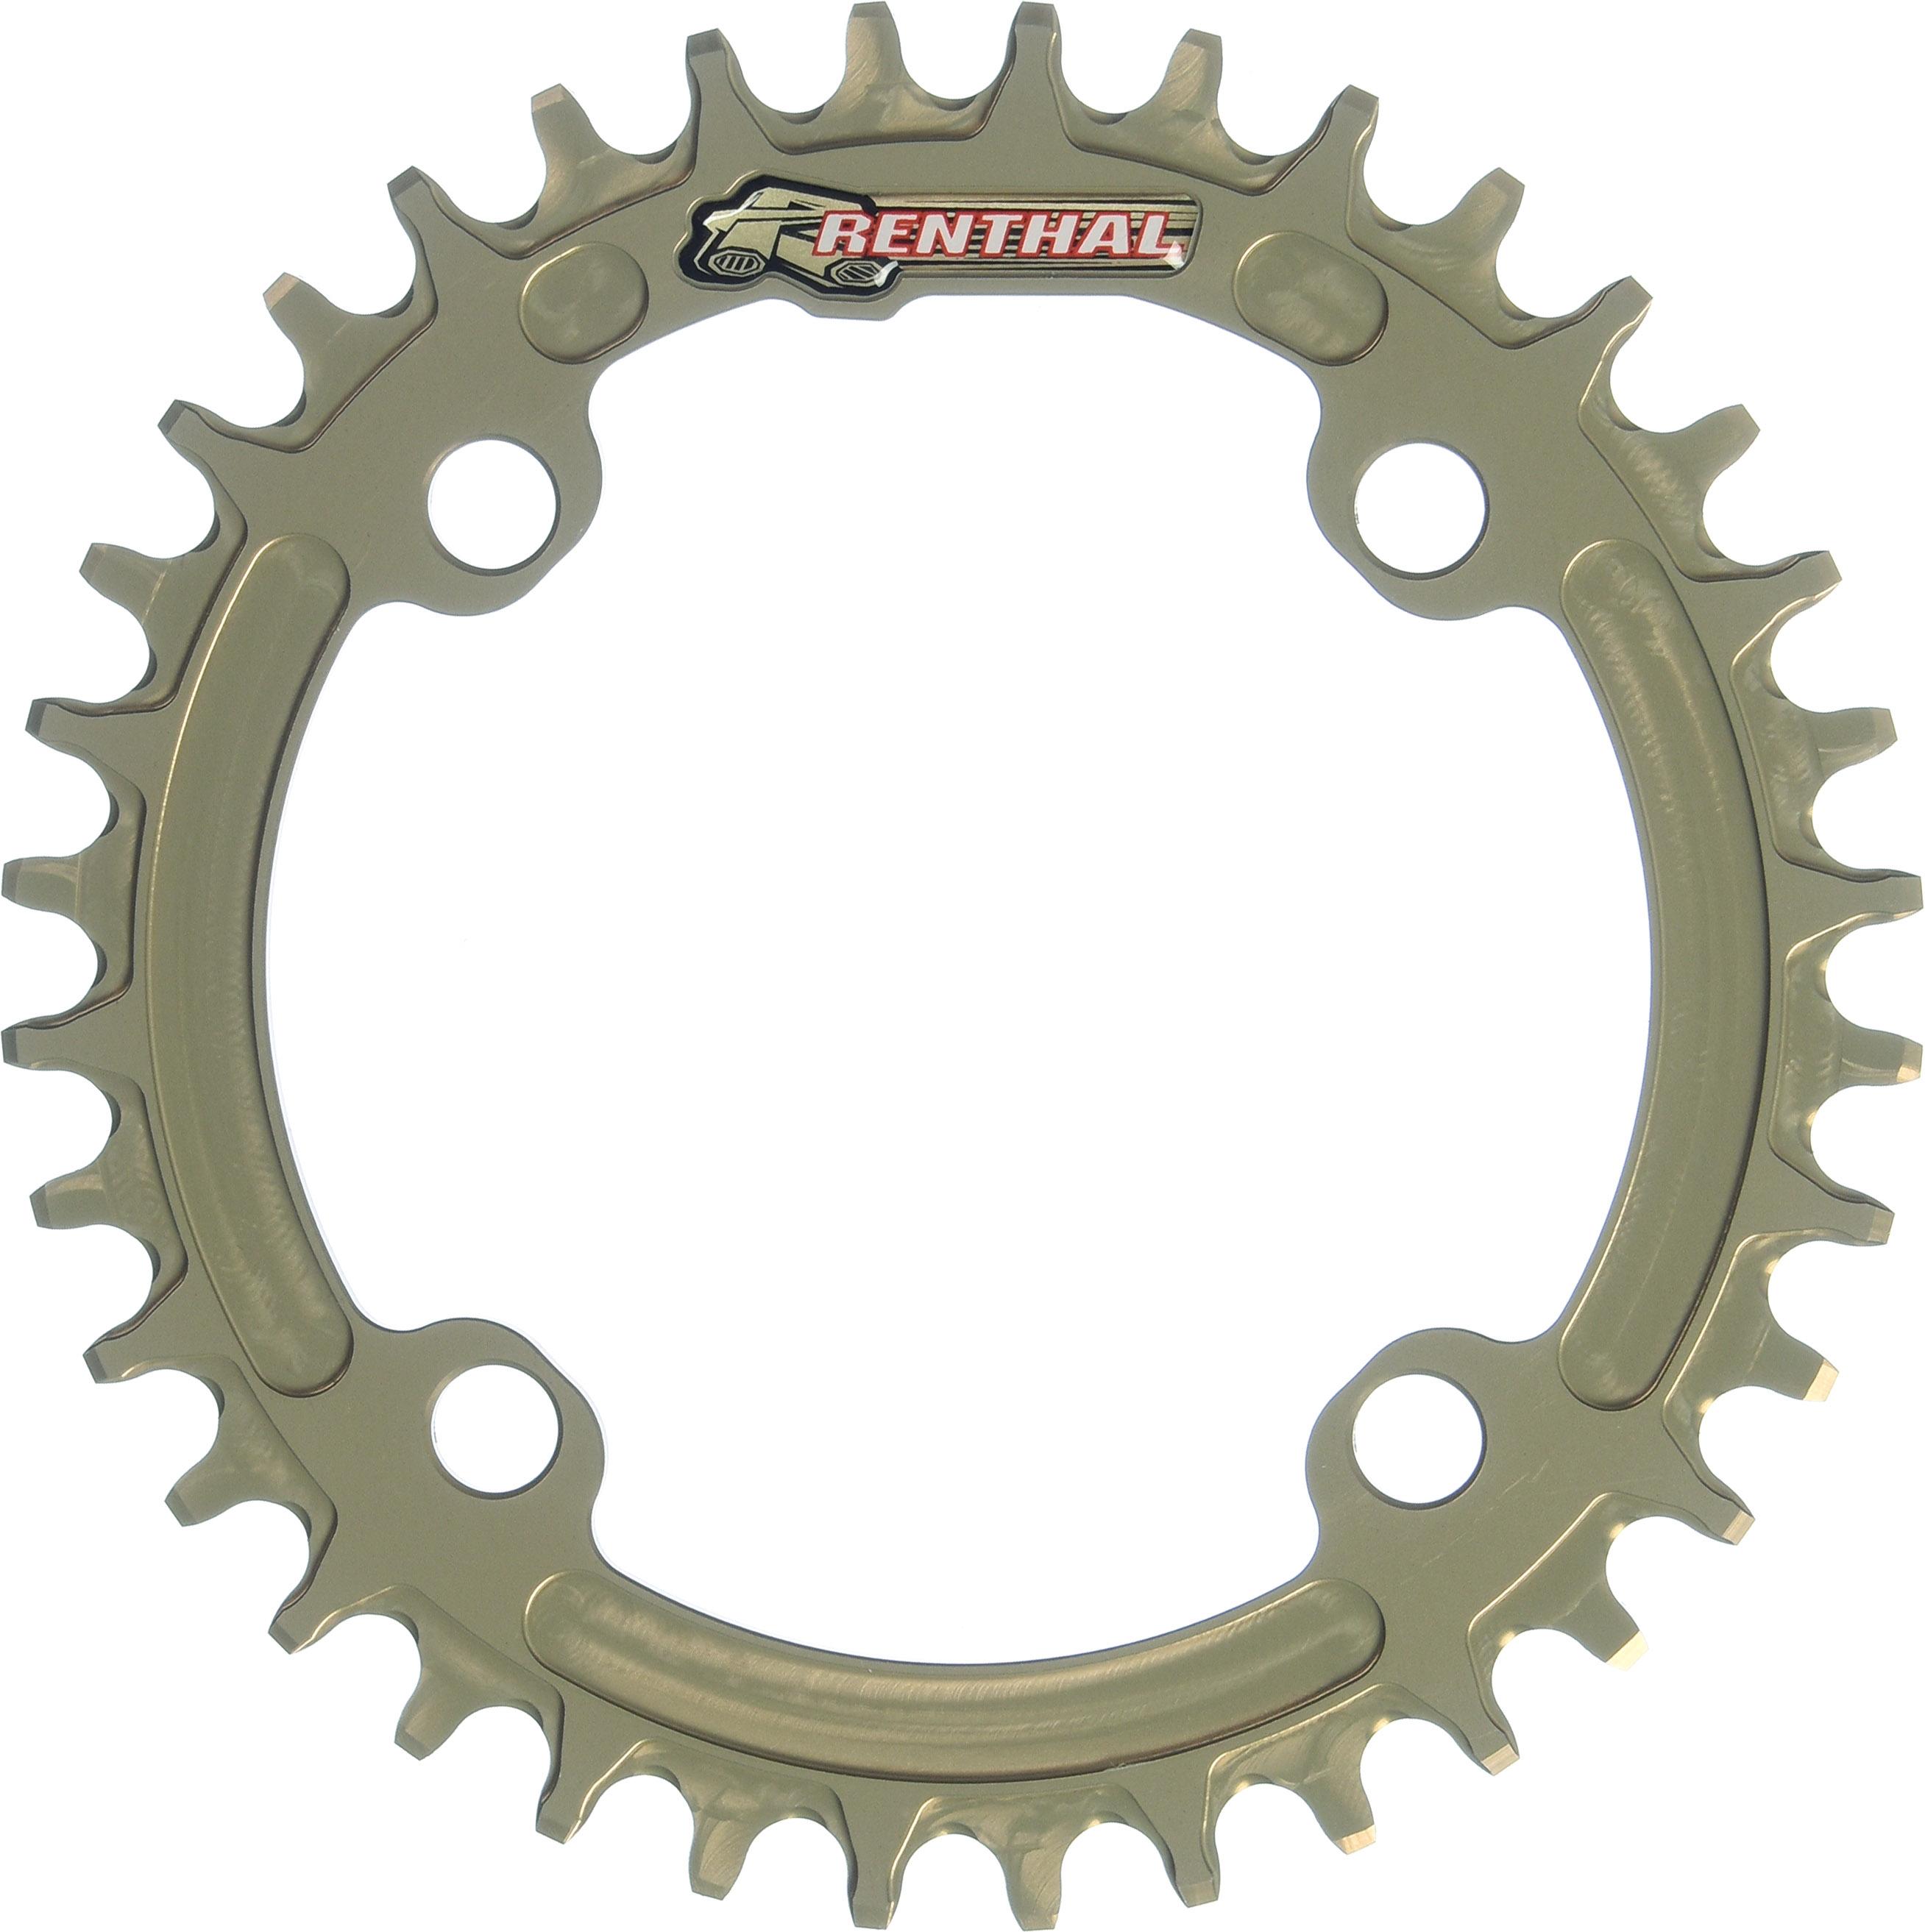 Renthal 1xr Chainring  Gold